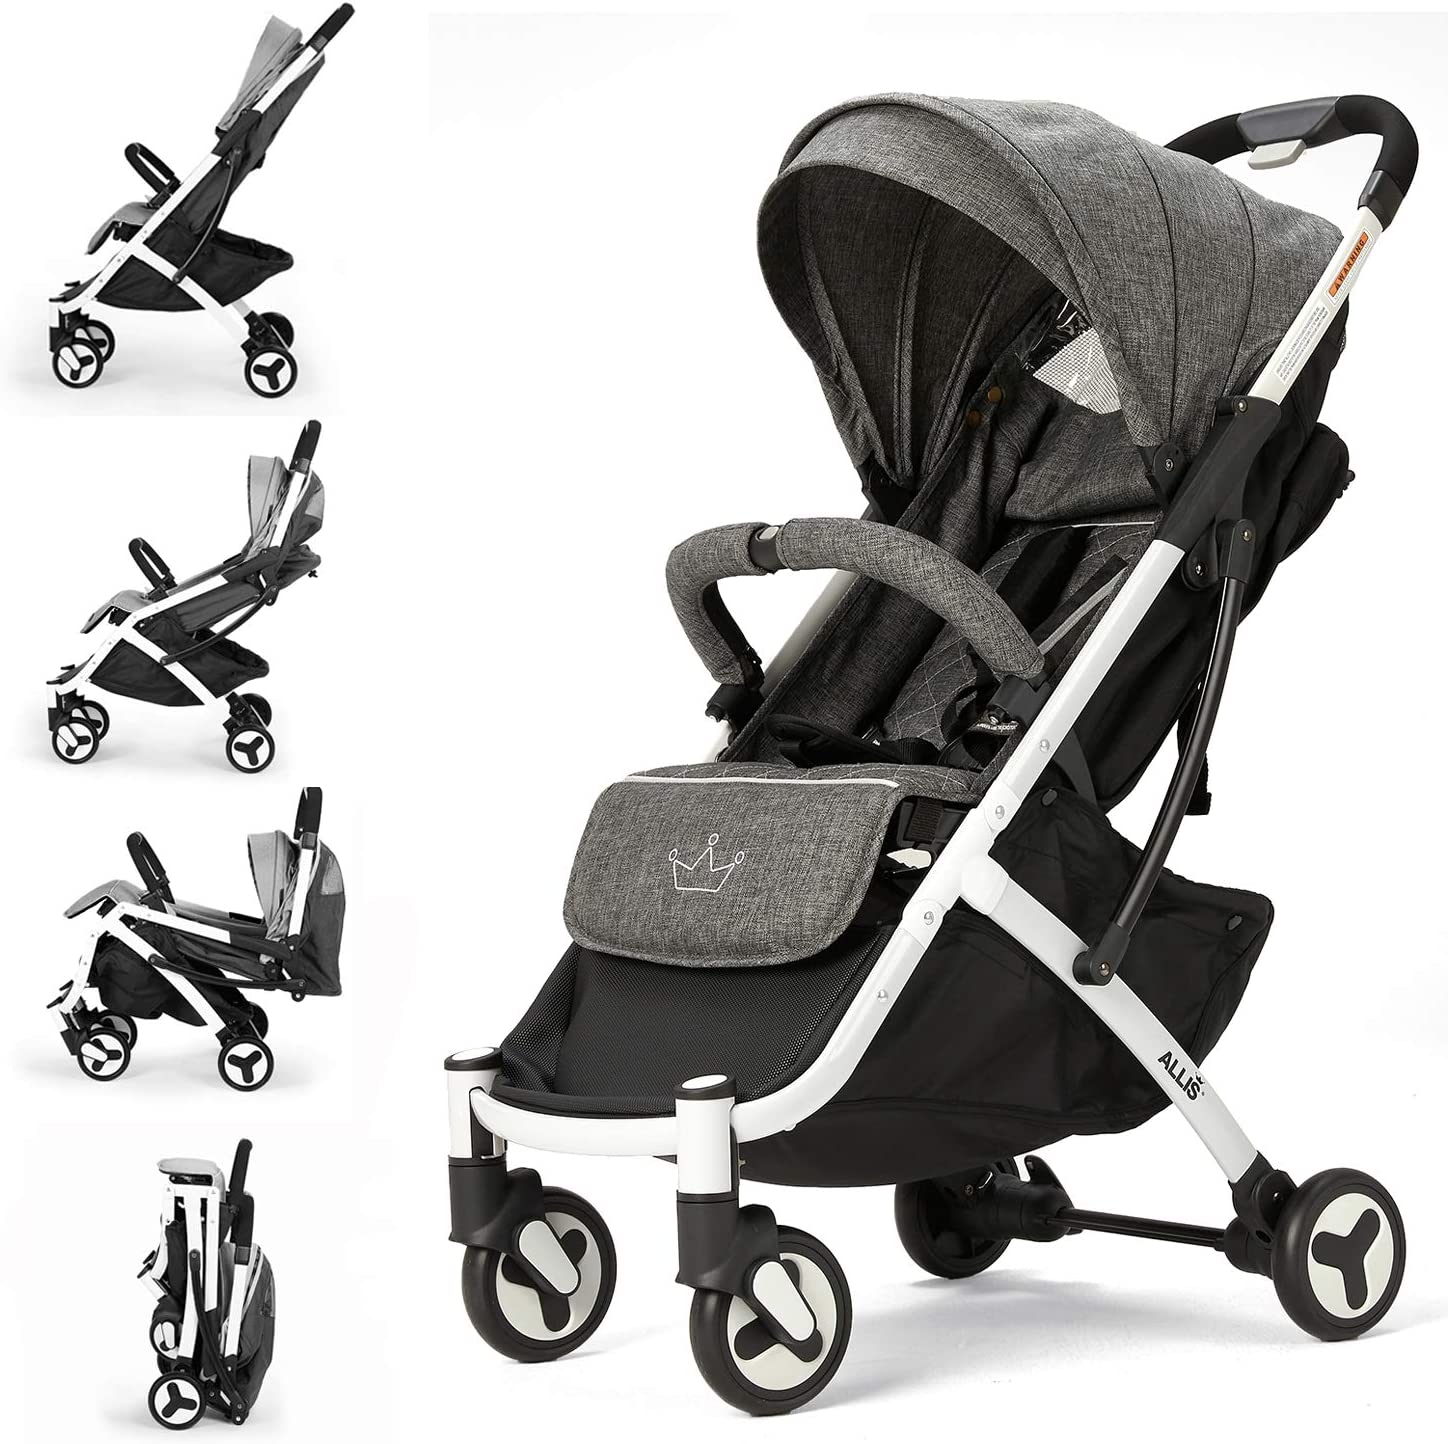 Baby lightway stroller The luxury of a large padded seat for the extra comfort of your little one